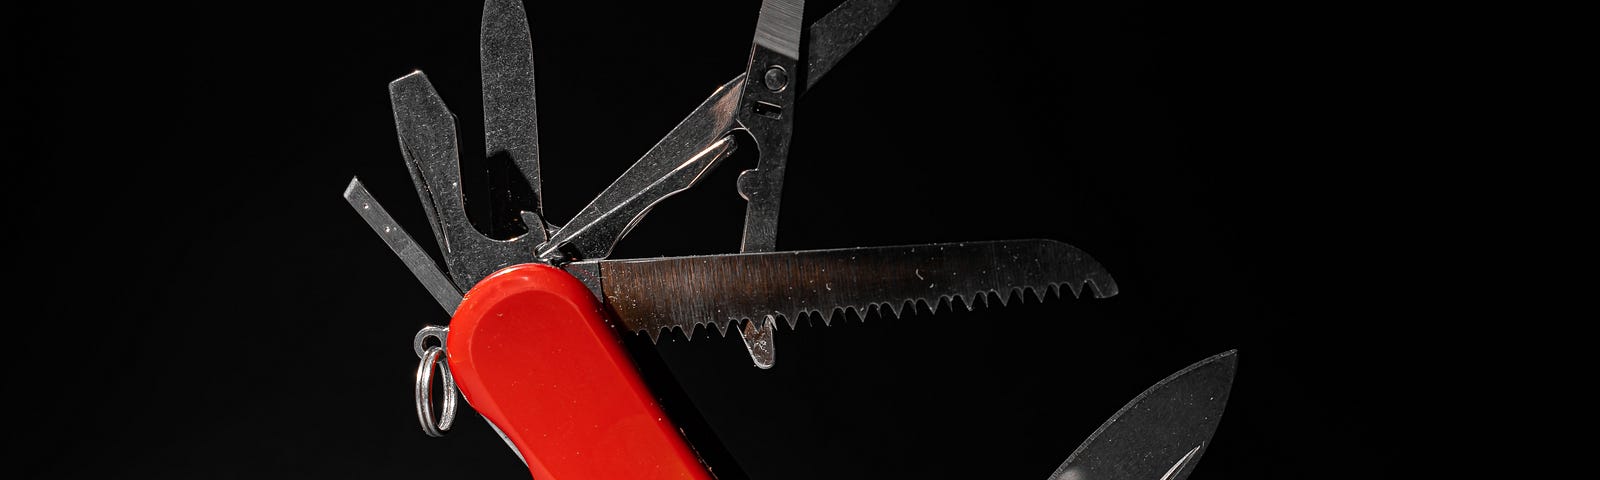 Photo of red pocket knife multi-tool propped up at a 45˚ angle, with all its tools extended at different angles